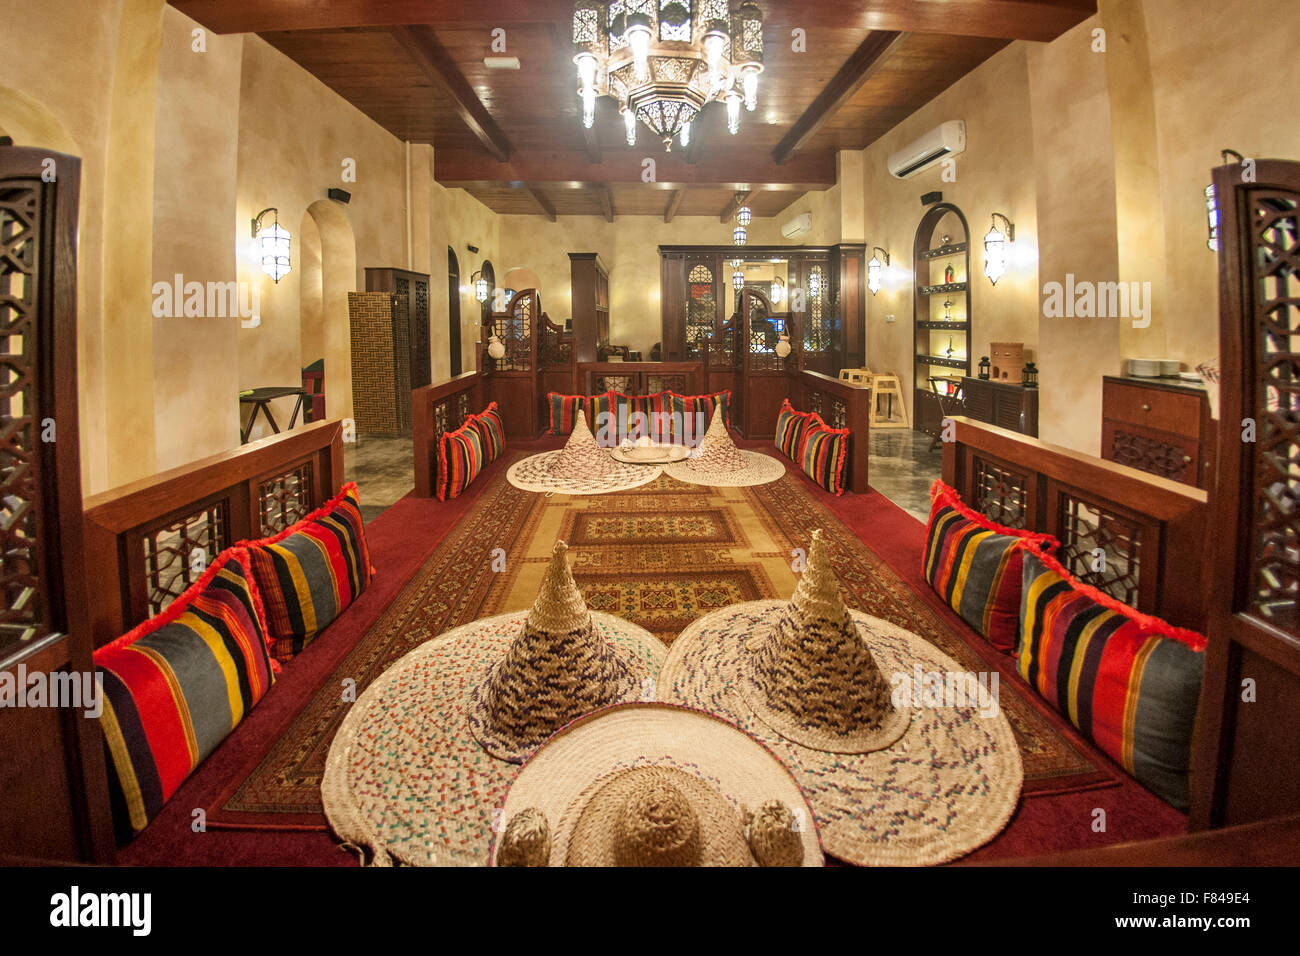 Interior of Bait Al Luban restaurant in the Mutrah district of Muscat, the capital of the Sultanate of Oman. Stock Photo